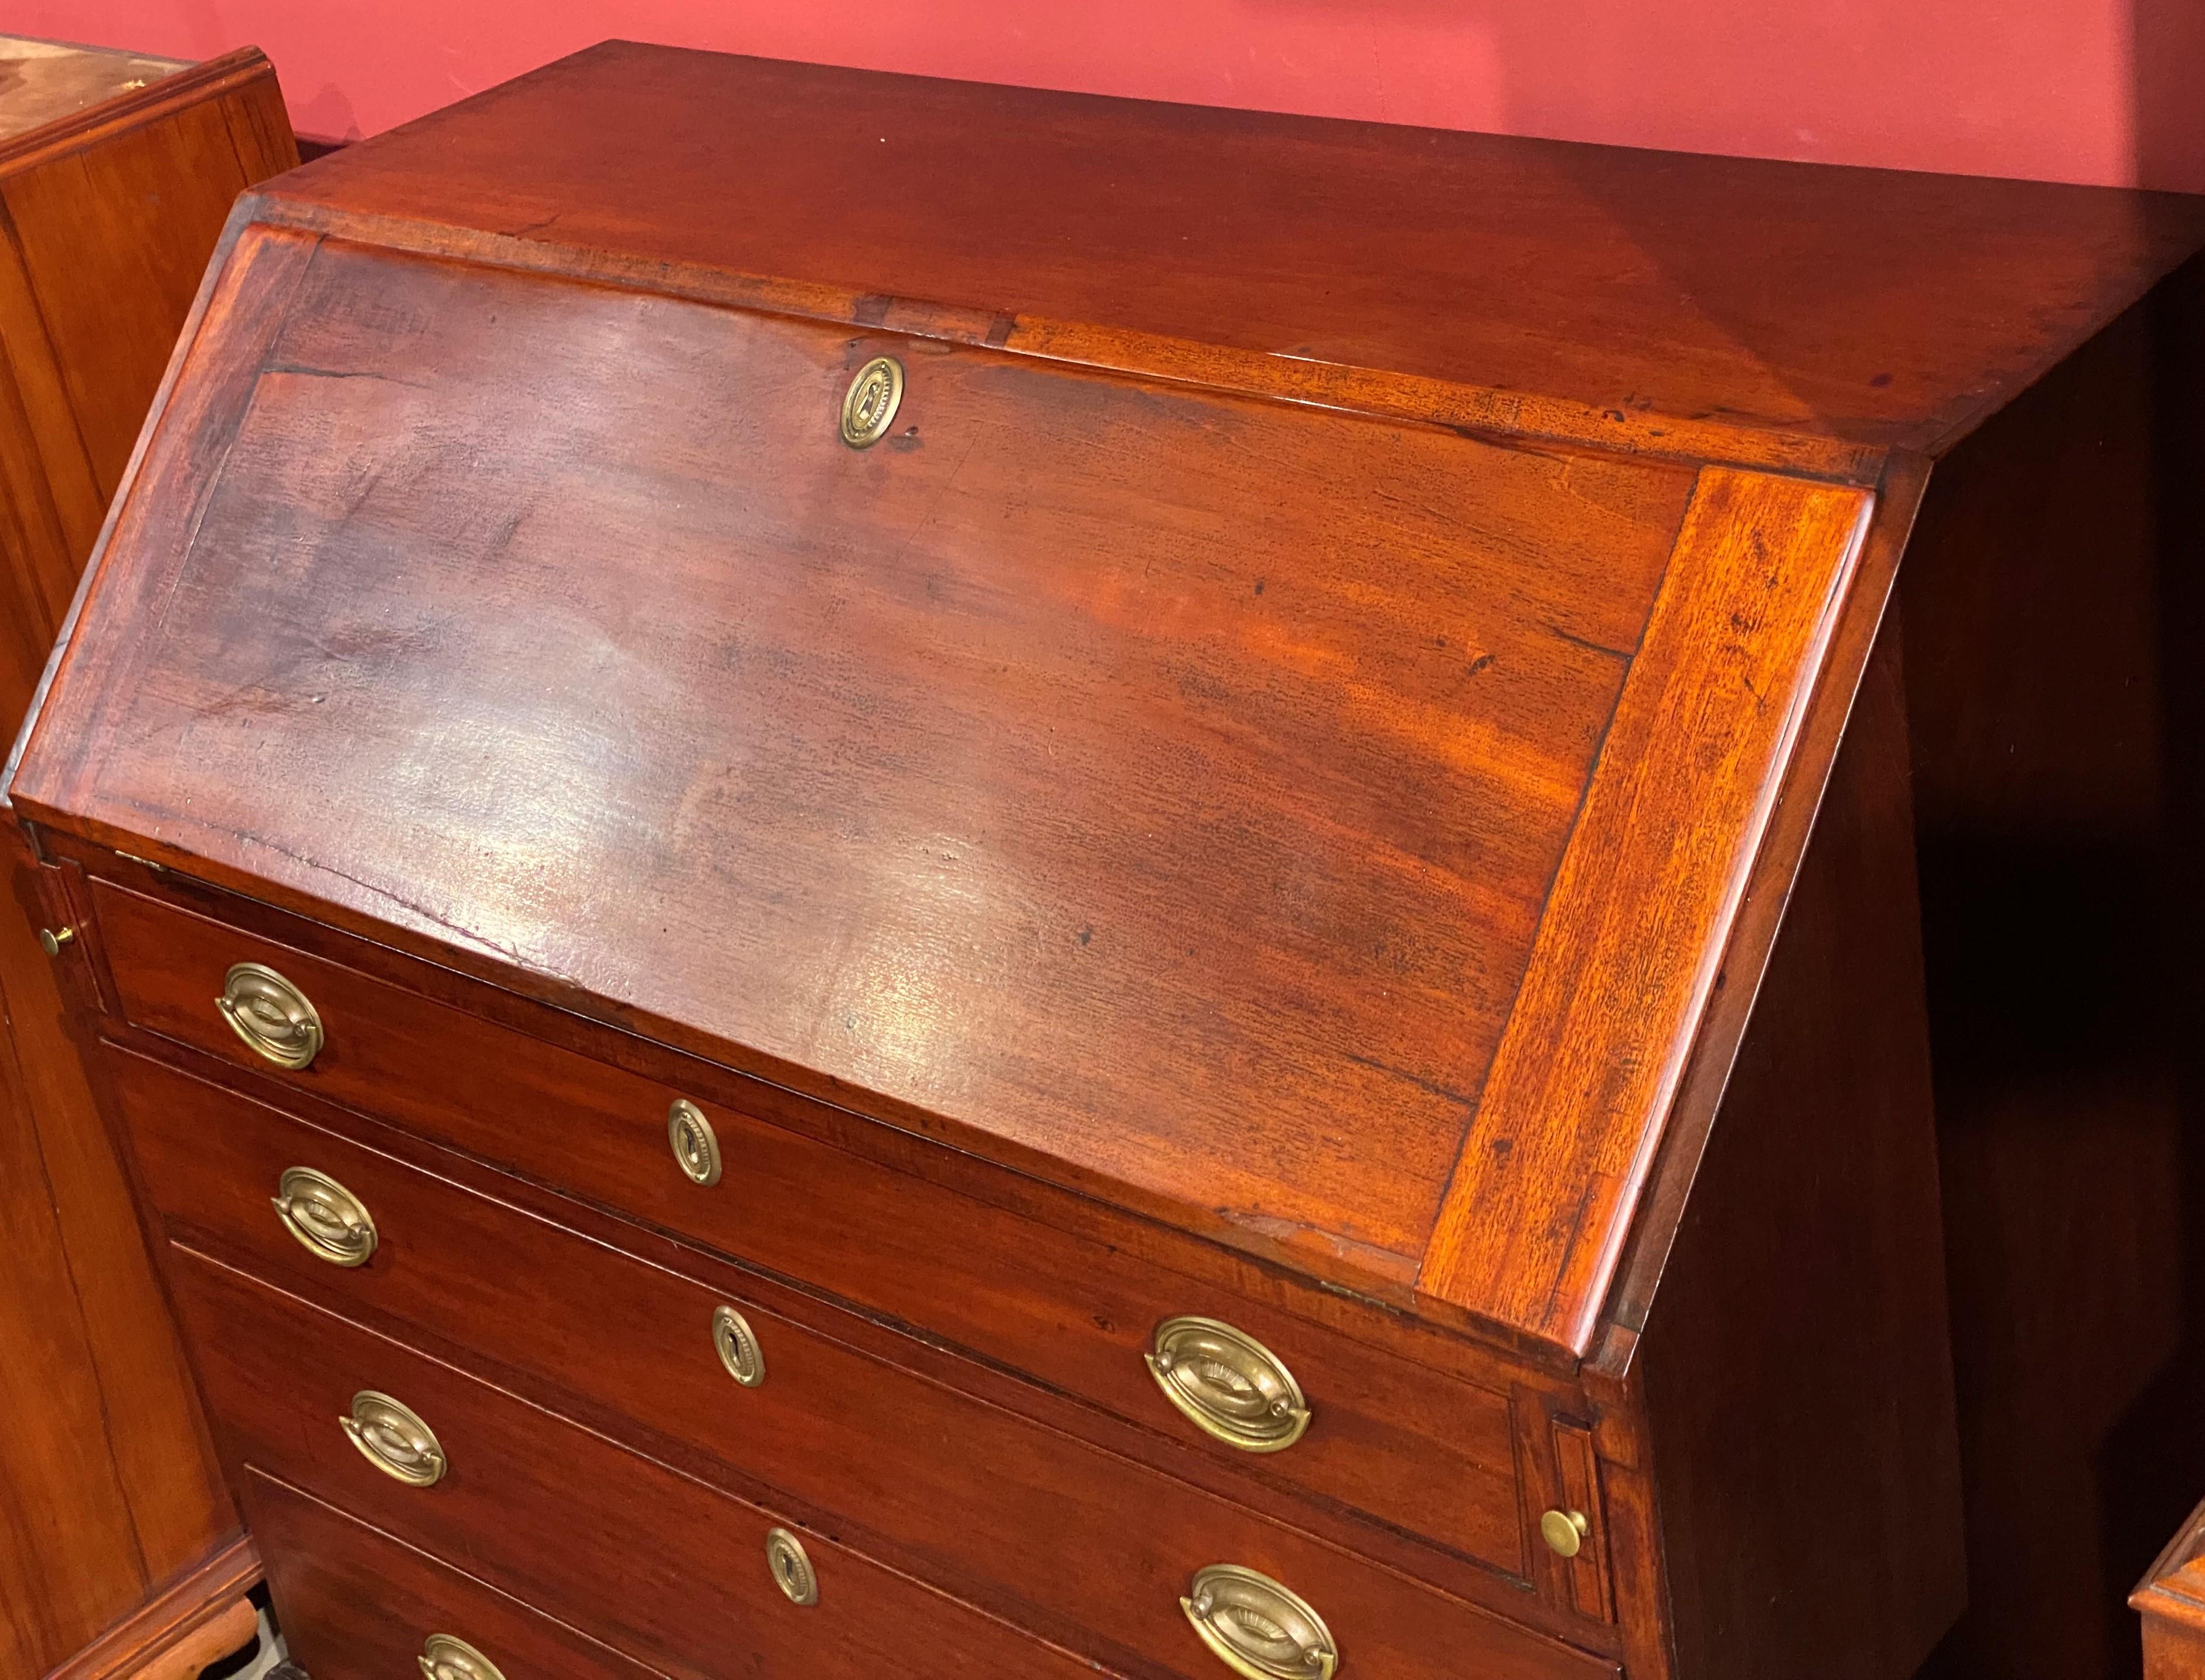 A good example of a Chippendale mahogany slant front desk with compartmentalized interior, including valanced cubbies and fitted drawers, over four graduated dovetailed drawers with oval replaced period brasses, all supported by nicely carved ball &